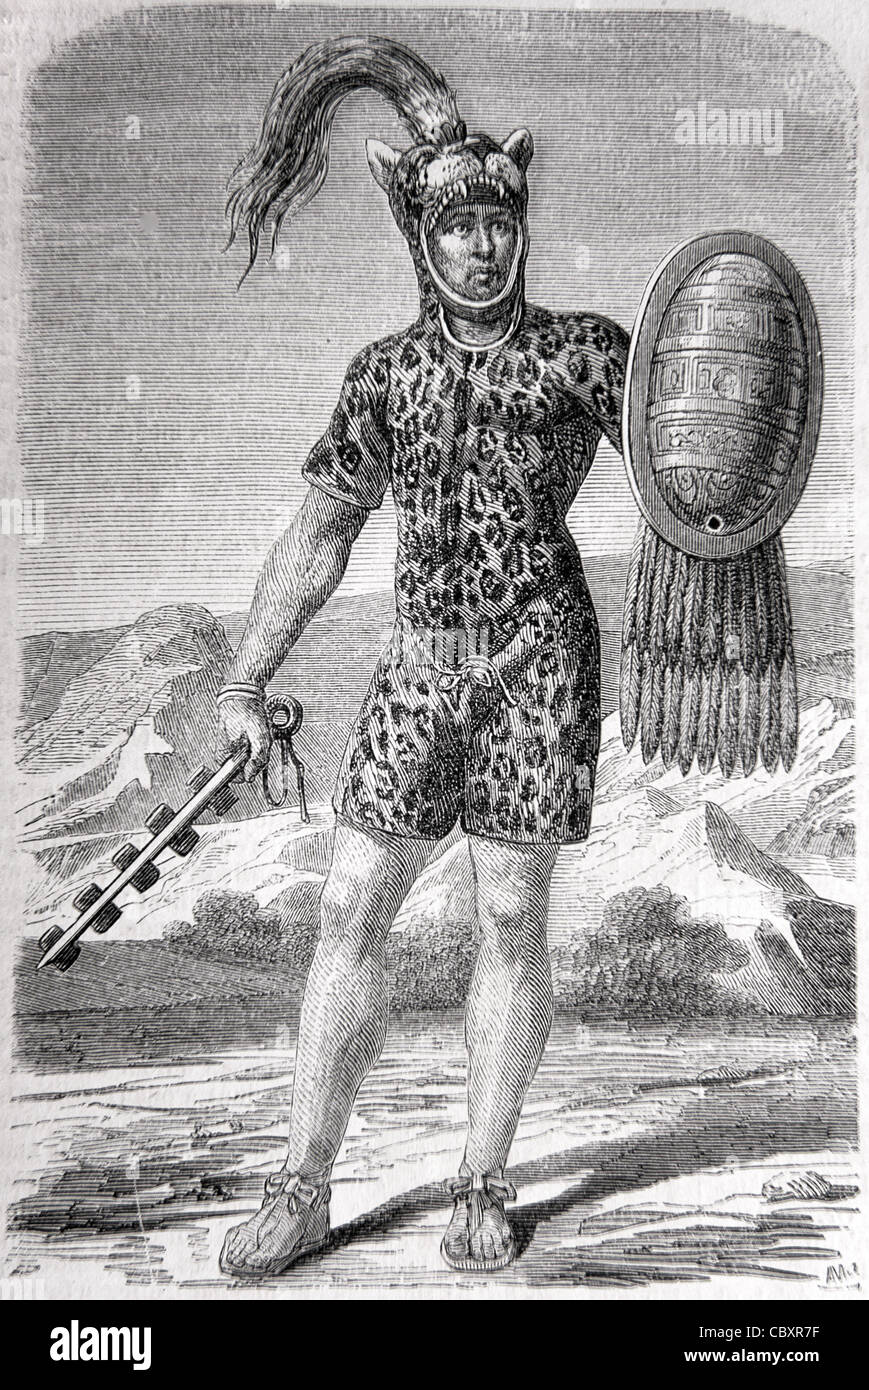 Aztec Chief  'of a Hundred Men' Wearing a Jaguar Skin Costume with Shield and Wooden Baton Encrusted with Blades, Aztec Empire. Vintage Illustration or Engraving Stock Photo